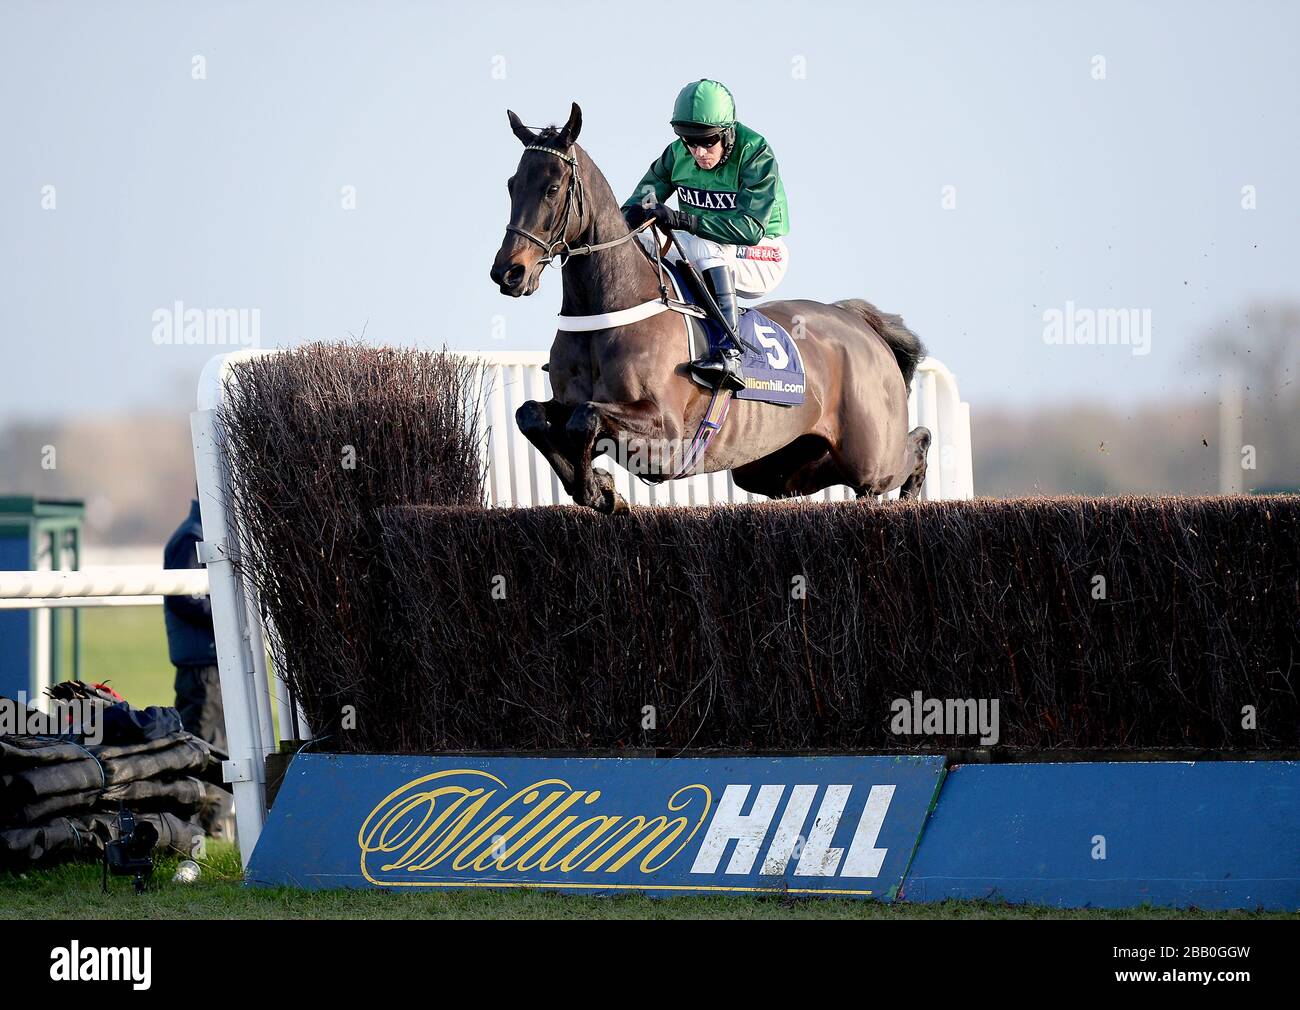 Grandouet, ridden by Barry Geraghty during the Williamhill.com Novices' Chase Stock Photo